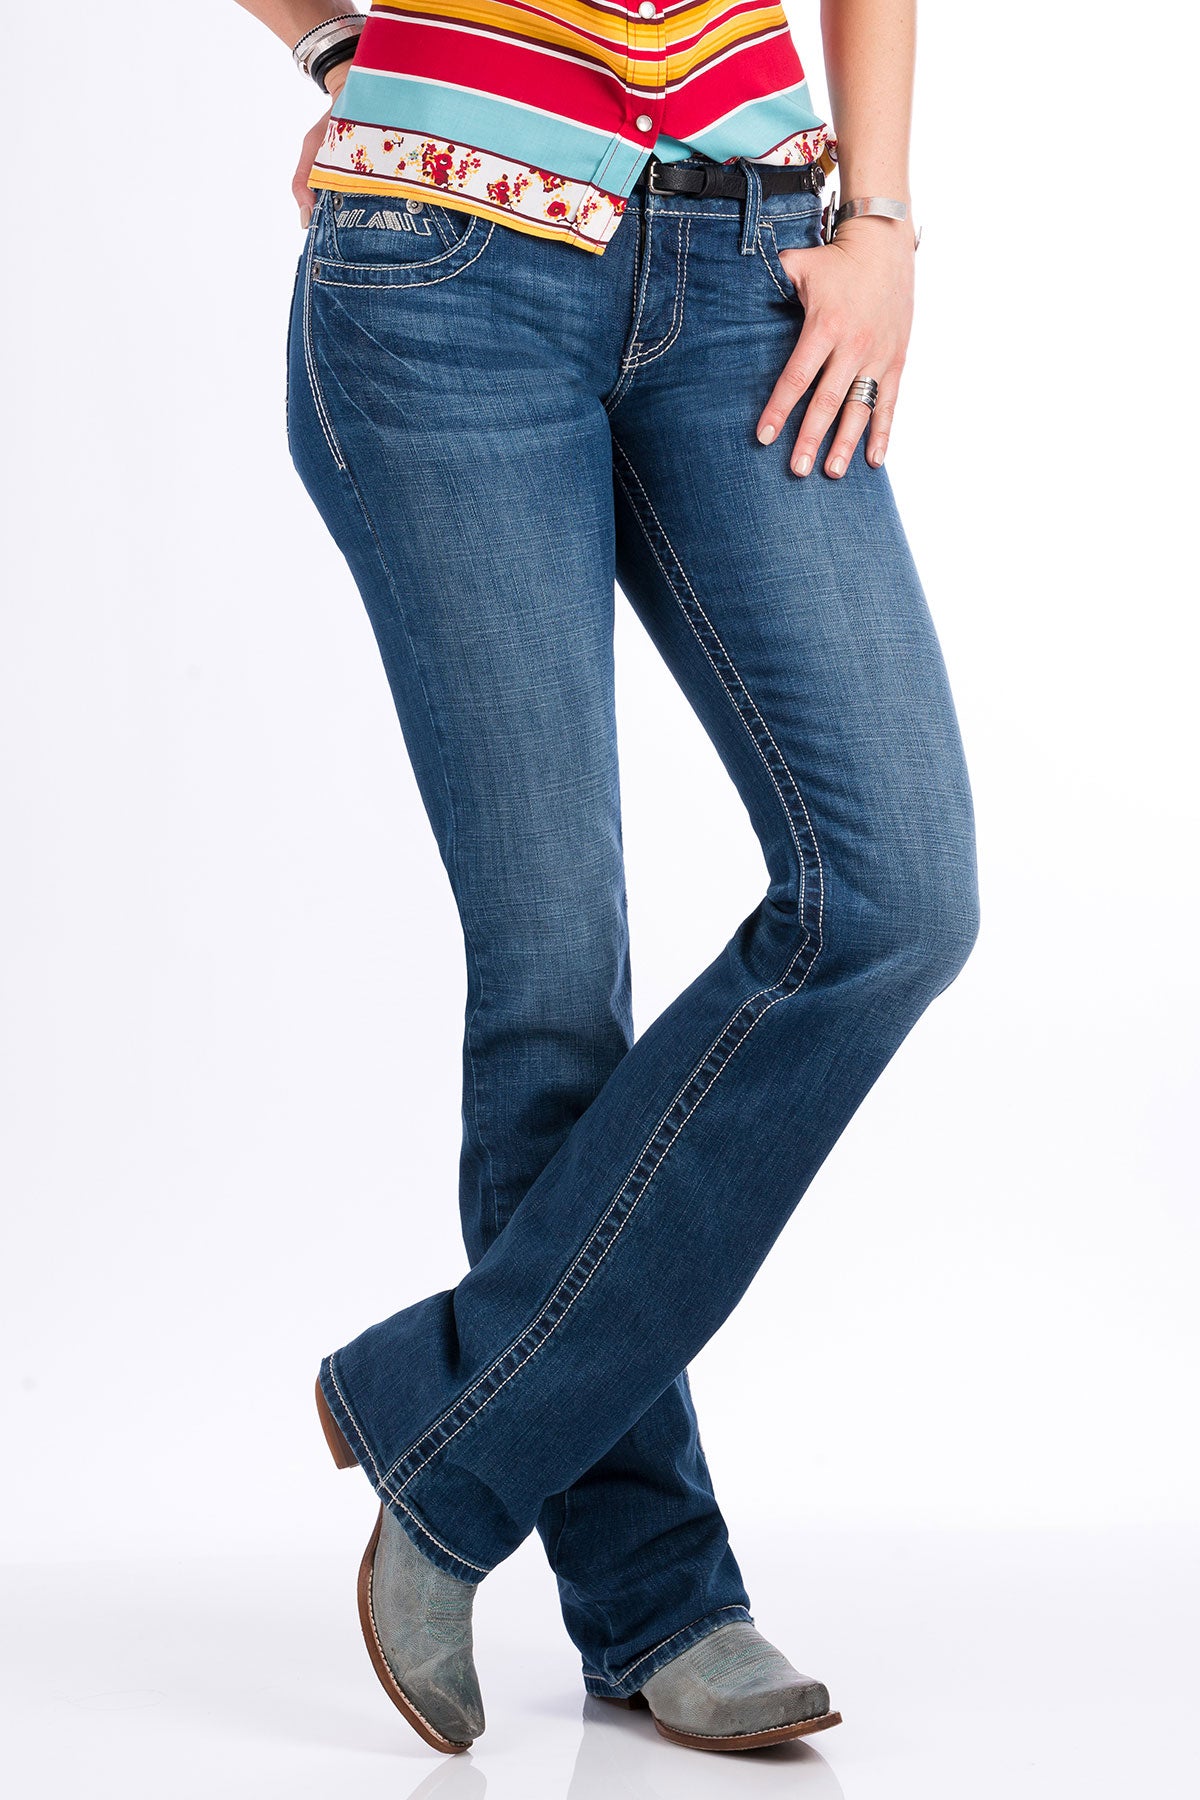 No Fade Ladies Slim Fit And Stylish Fancy Jeans Ash Color With Ankle Length  Style at Best Price in Thiruvananthapuram | Pebbles